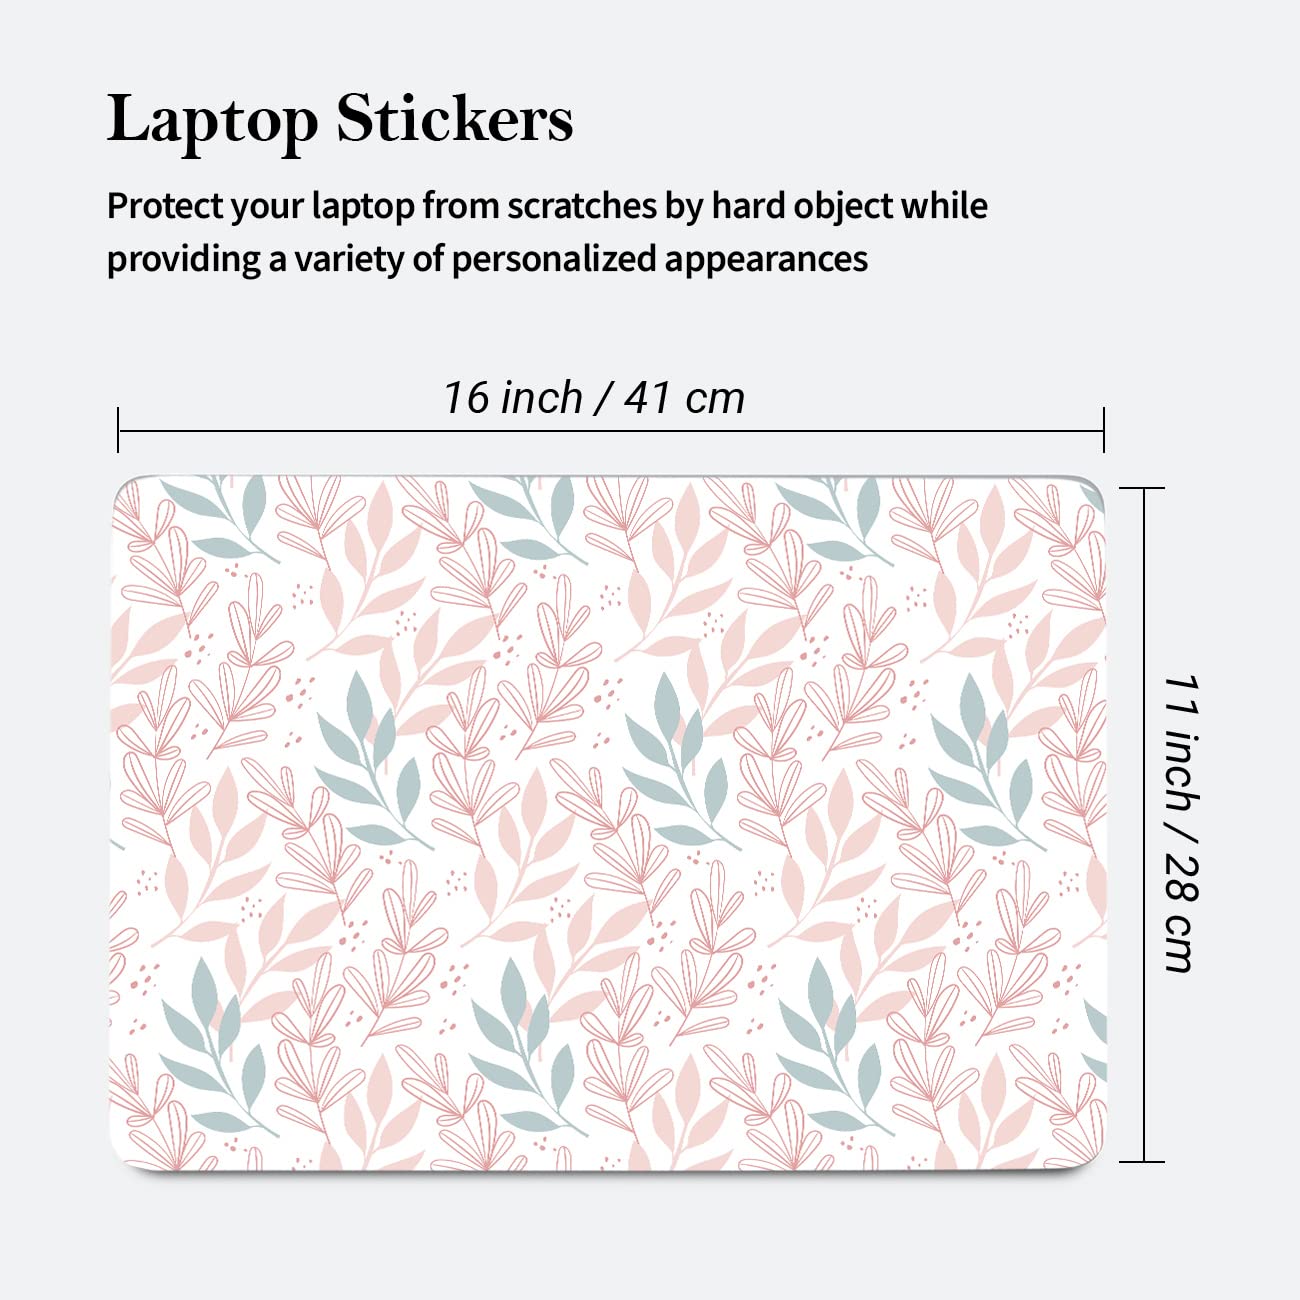 Kotart Vinyl Laptop Decals for All Laptops Upto 15.6 inch - Self Adhesive Nature Inspired Printed Laptop Skins / Stickers for HP Apple Acer Asus Dell LG and All Laptops-Kotart